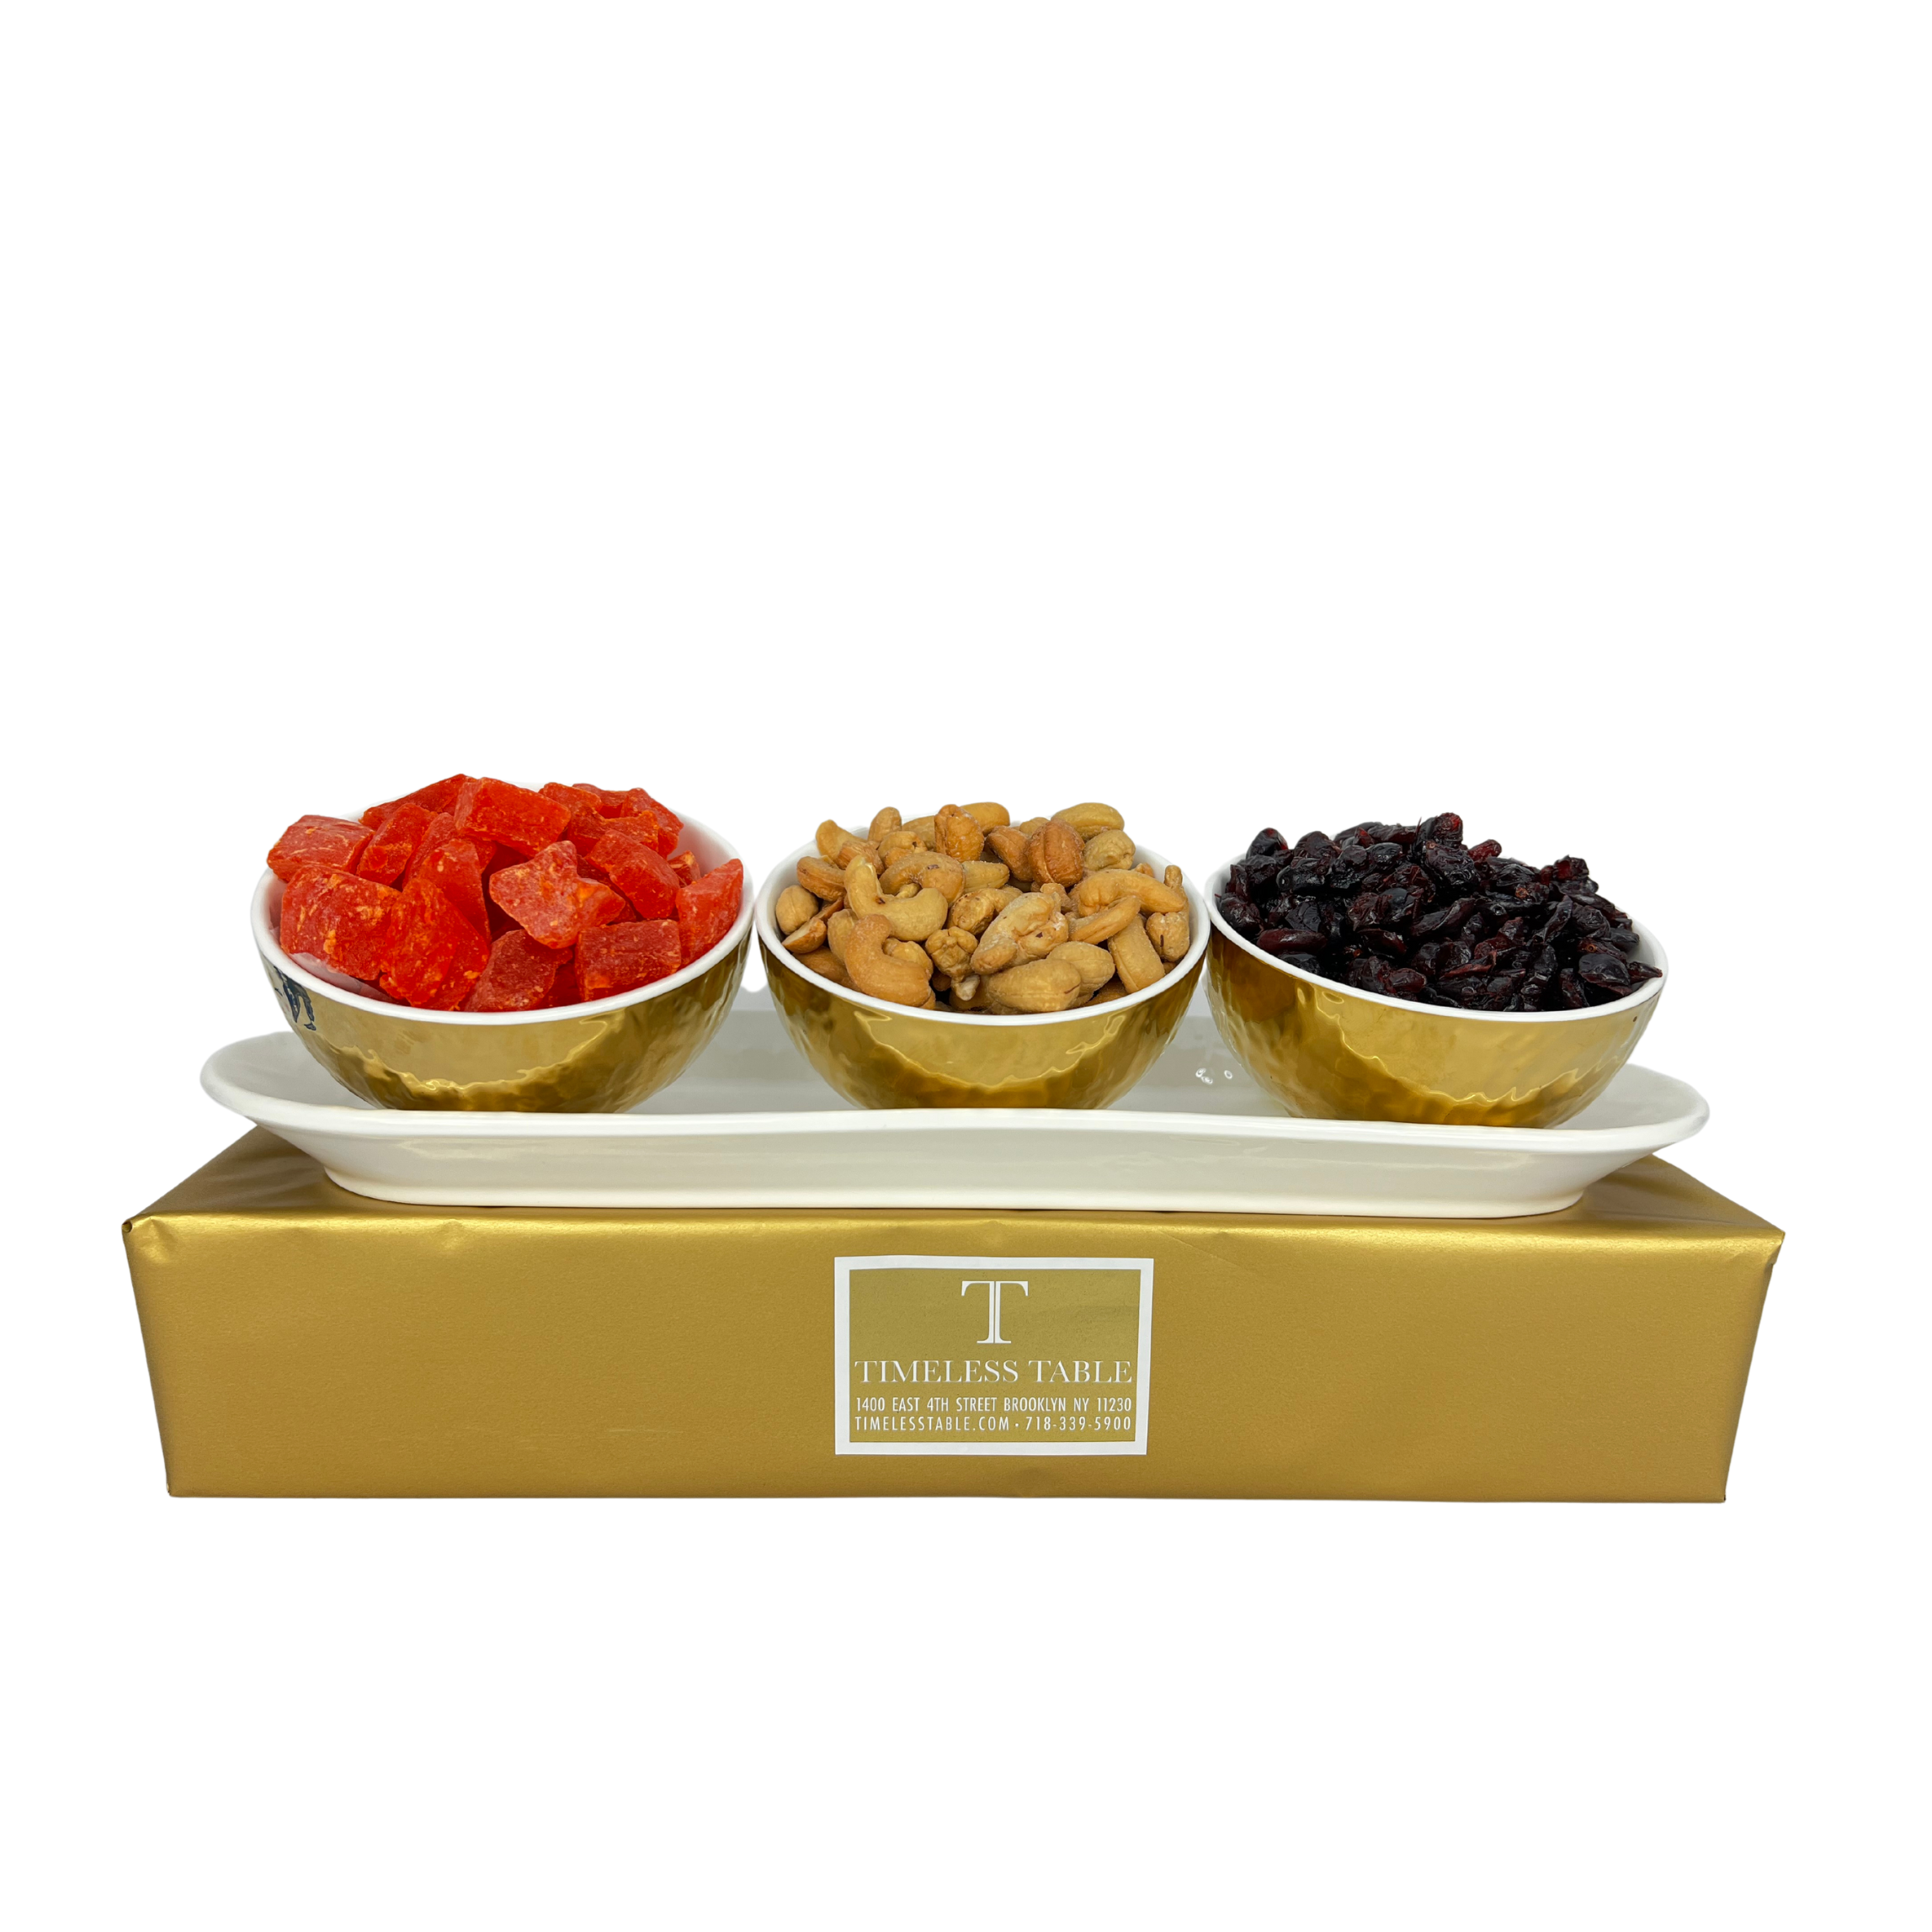 White Tray and 3 Bowls with Dried Fruit